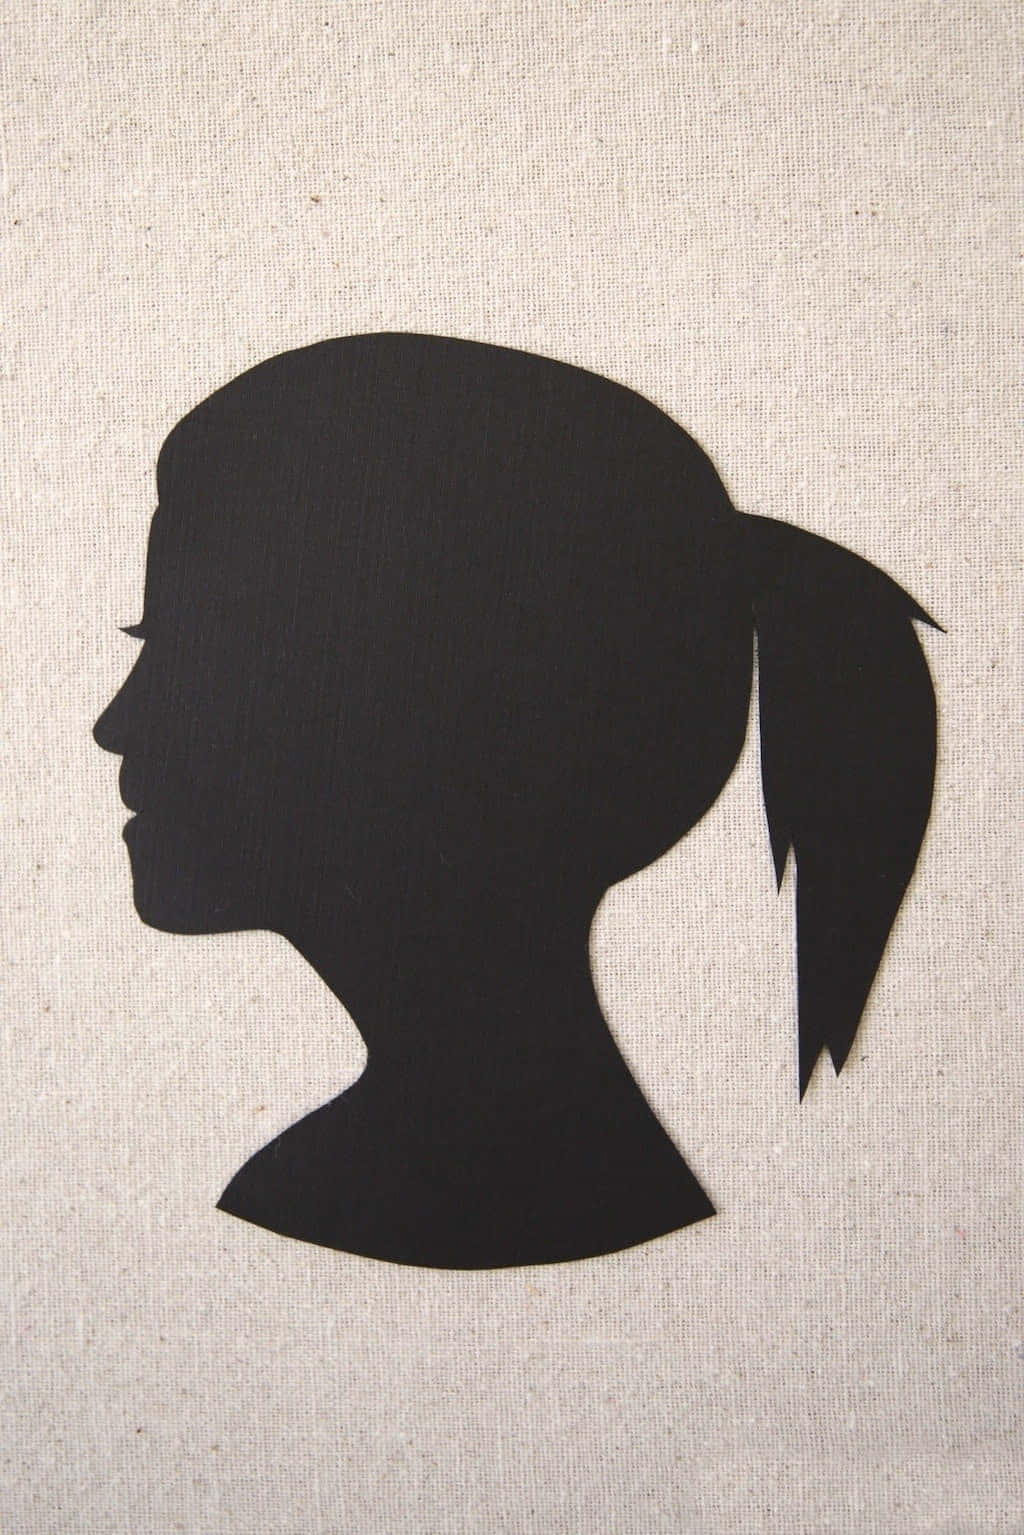 Silhouette Of A Woman With Ponytail